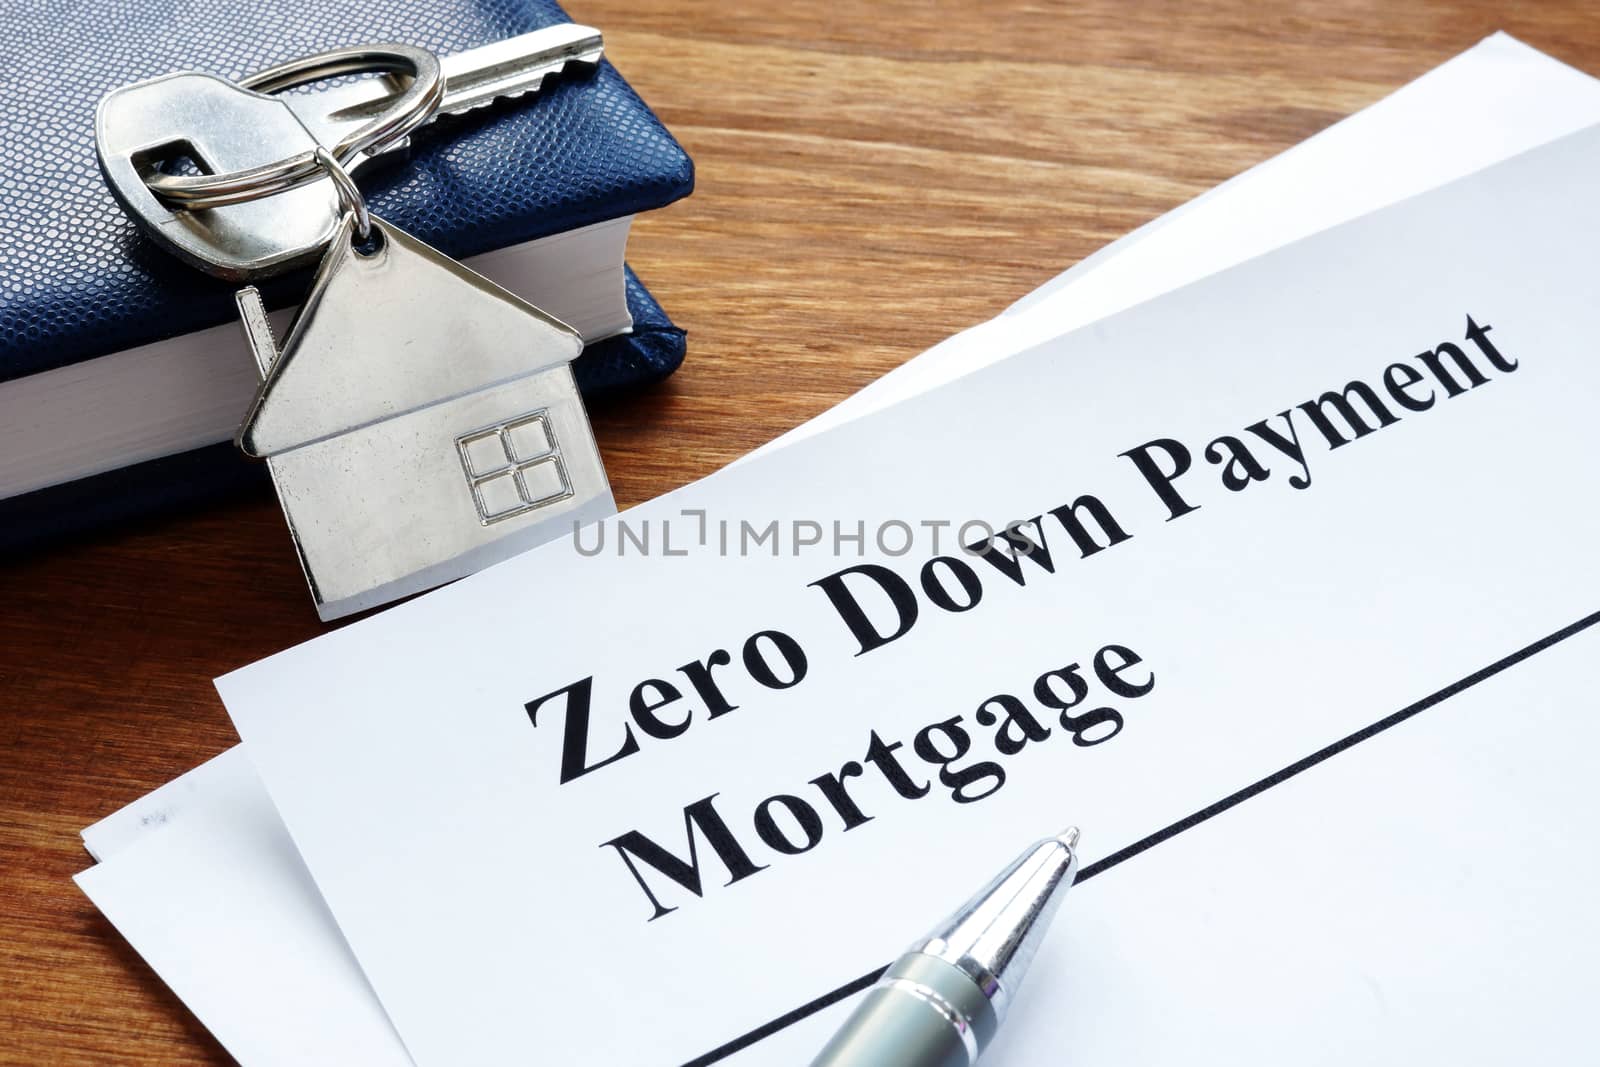 Zero down payment mortgage form and key. by designer491